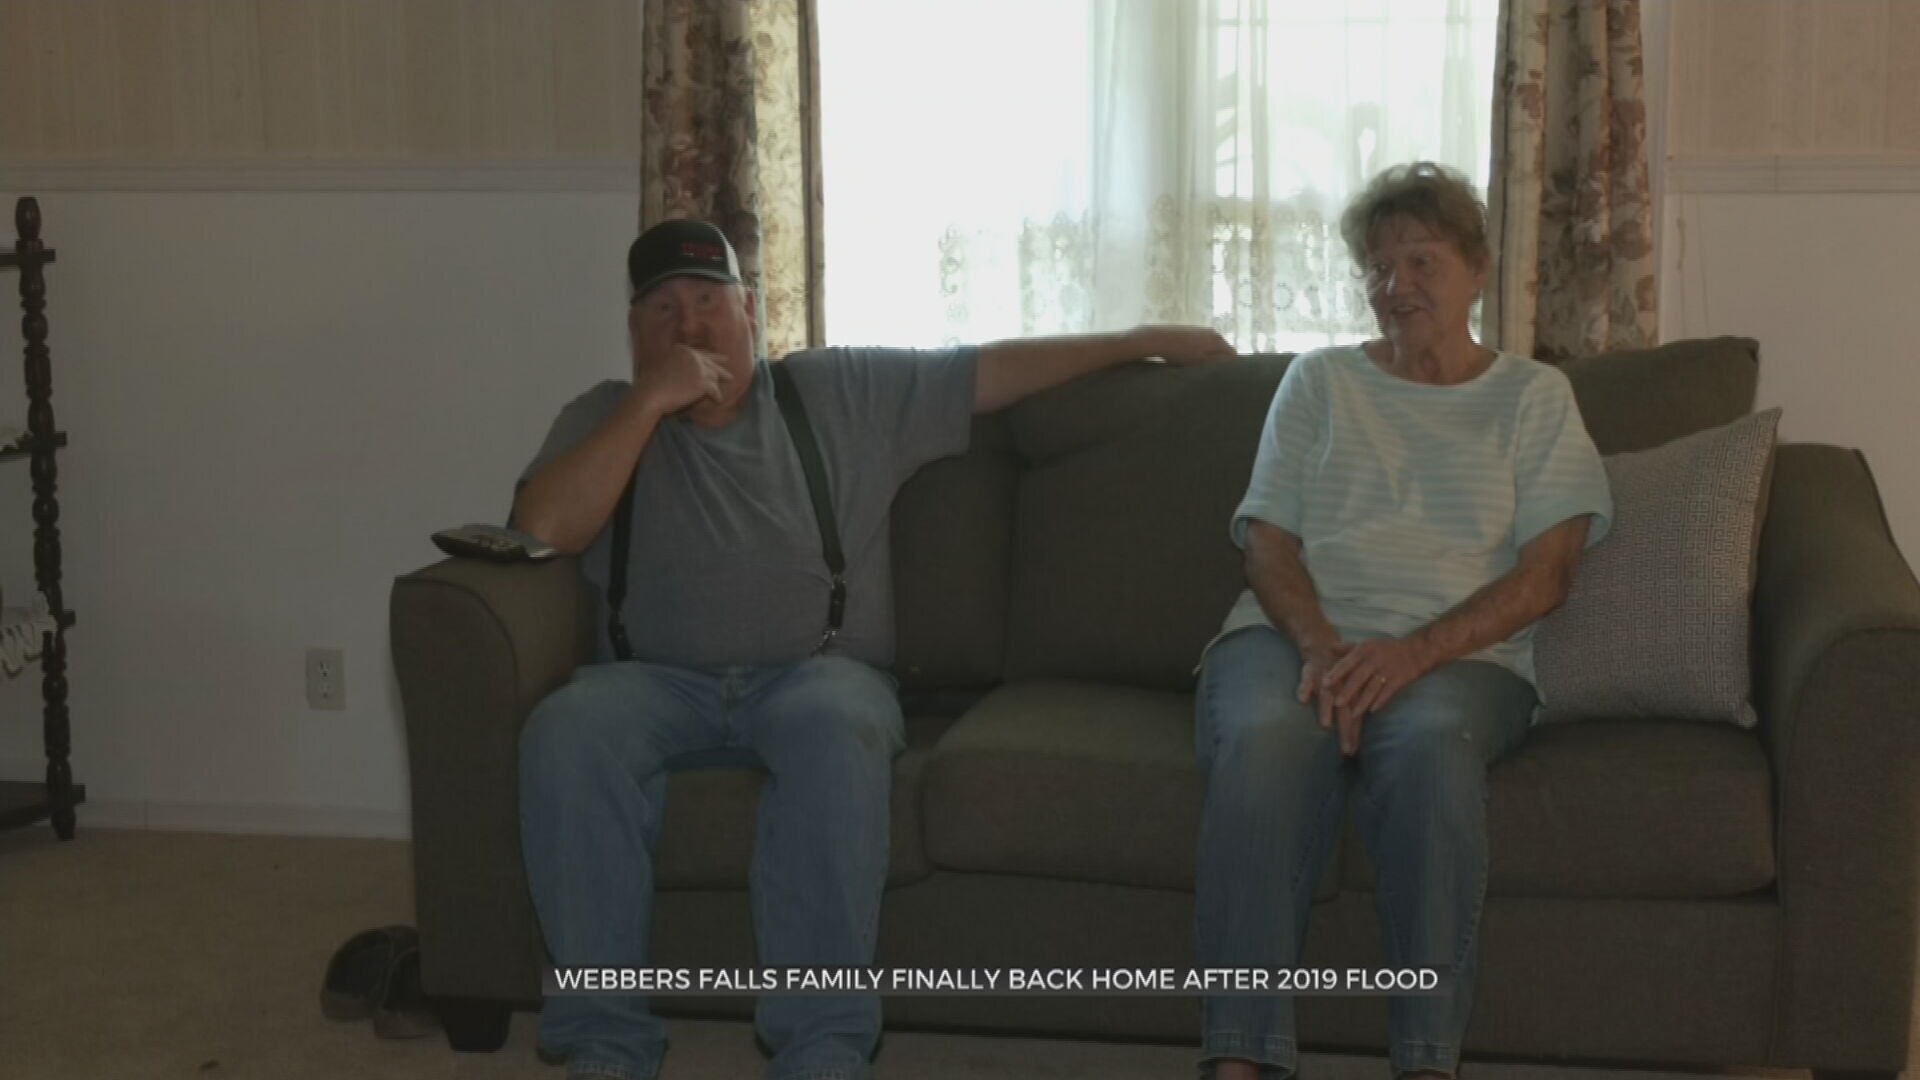 Webbers Falls Family Finally Back Home After 2019 Flood